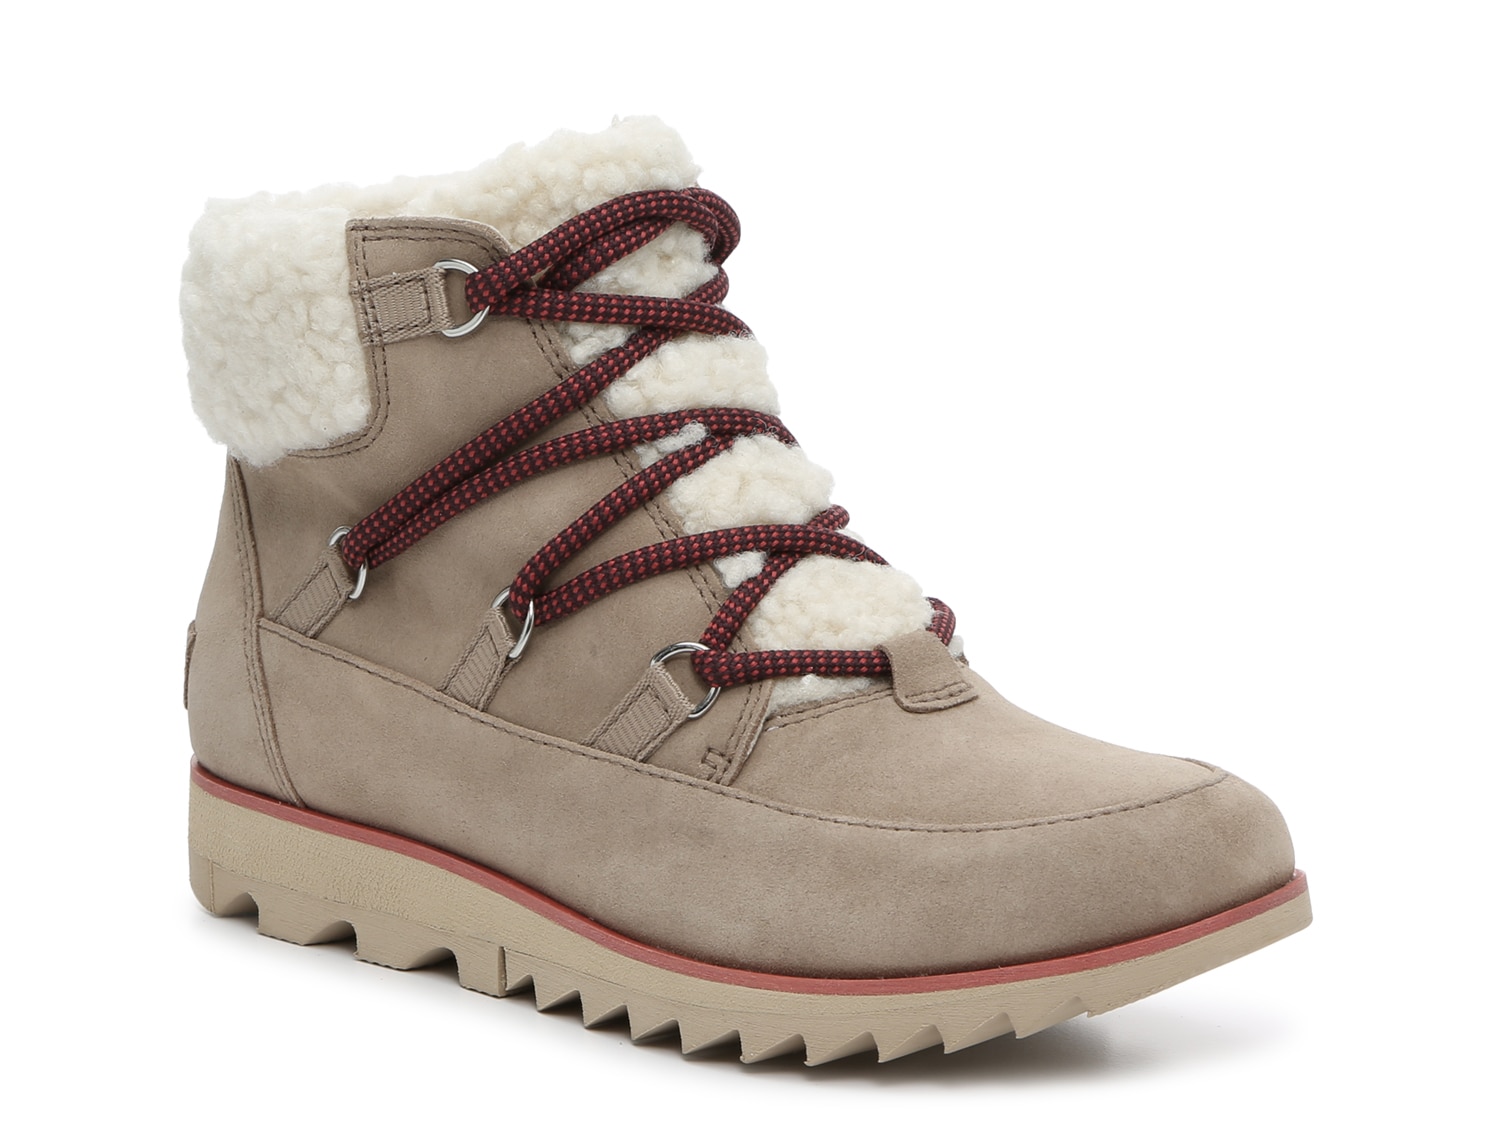 SOREL Harlow Lace Cozy Snow Boot - Free Shipping | DSW